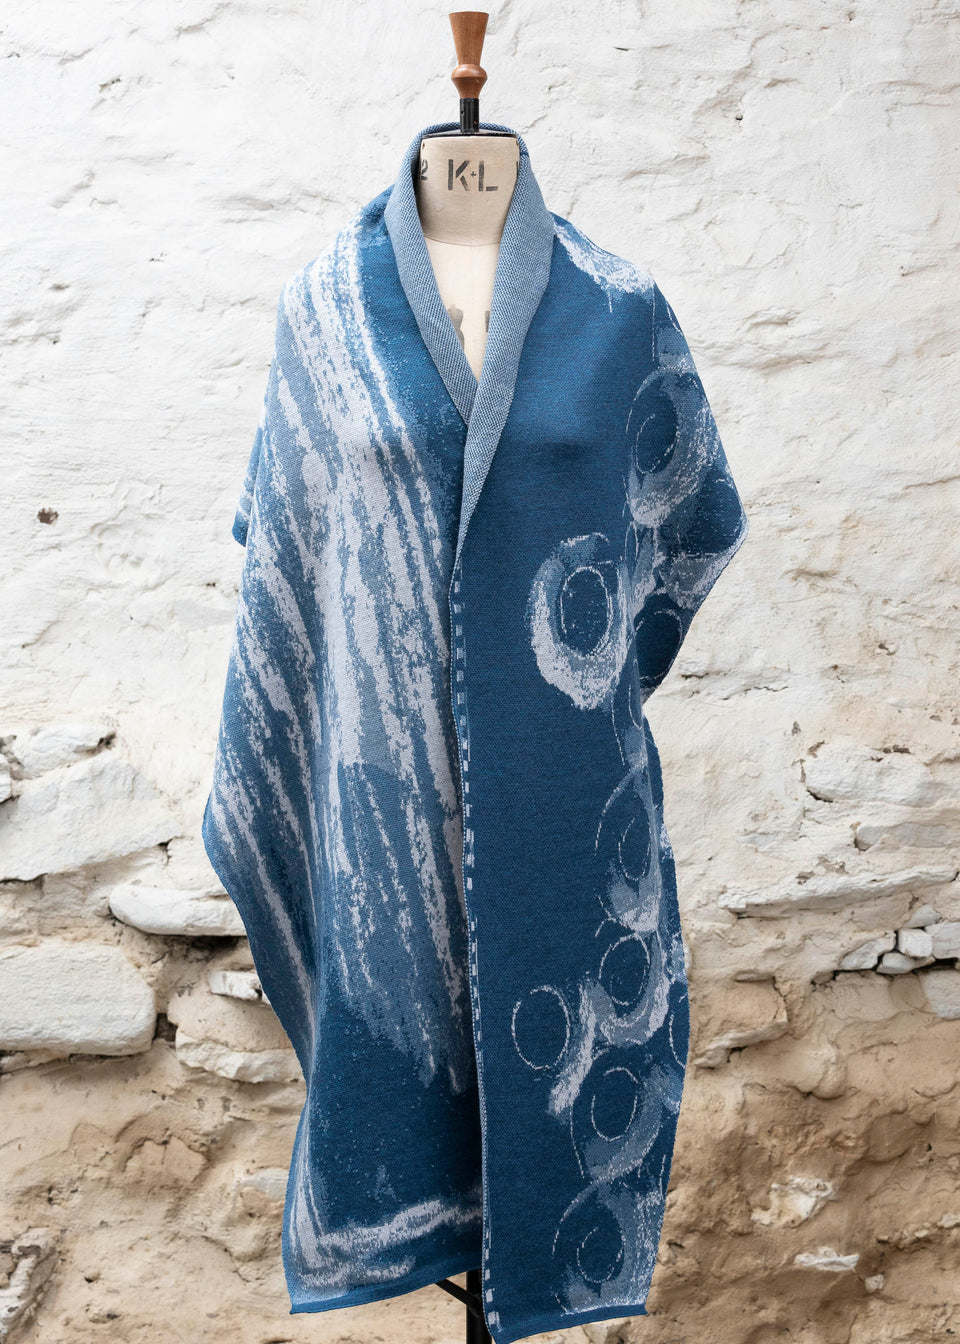 Finely knitted shawl in luxurious merino, made in Scotland. Shown on a vintage mannequin against a whitewashed wall. Abstract design in sea blues with curvilinear motifs. Draped to show full wrap from the front